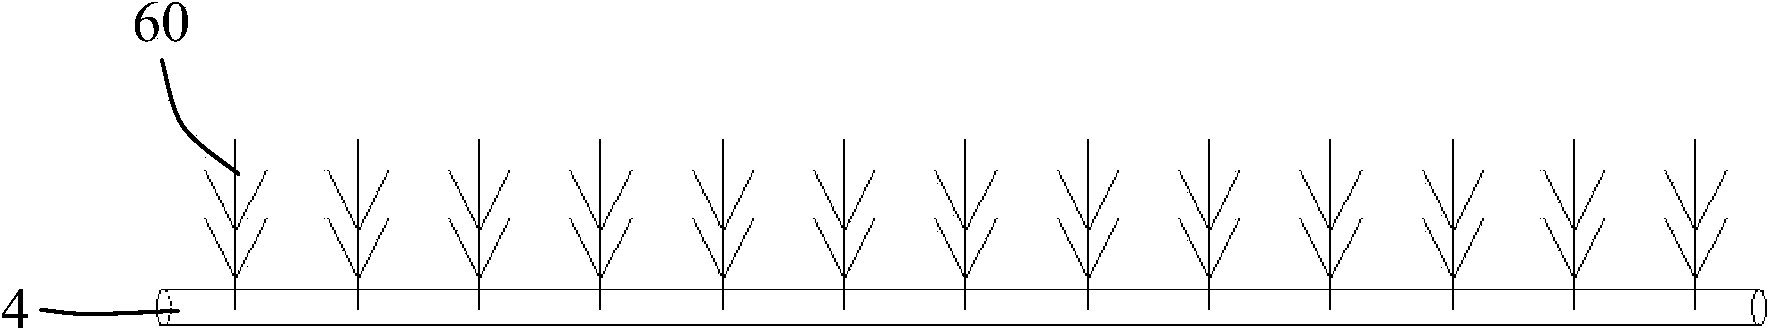 Paddy-upland rotation planting method of greenhouse potherbs